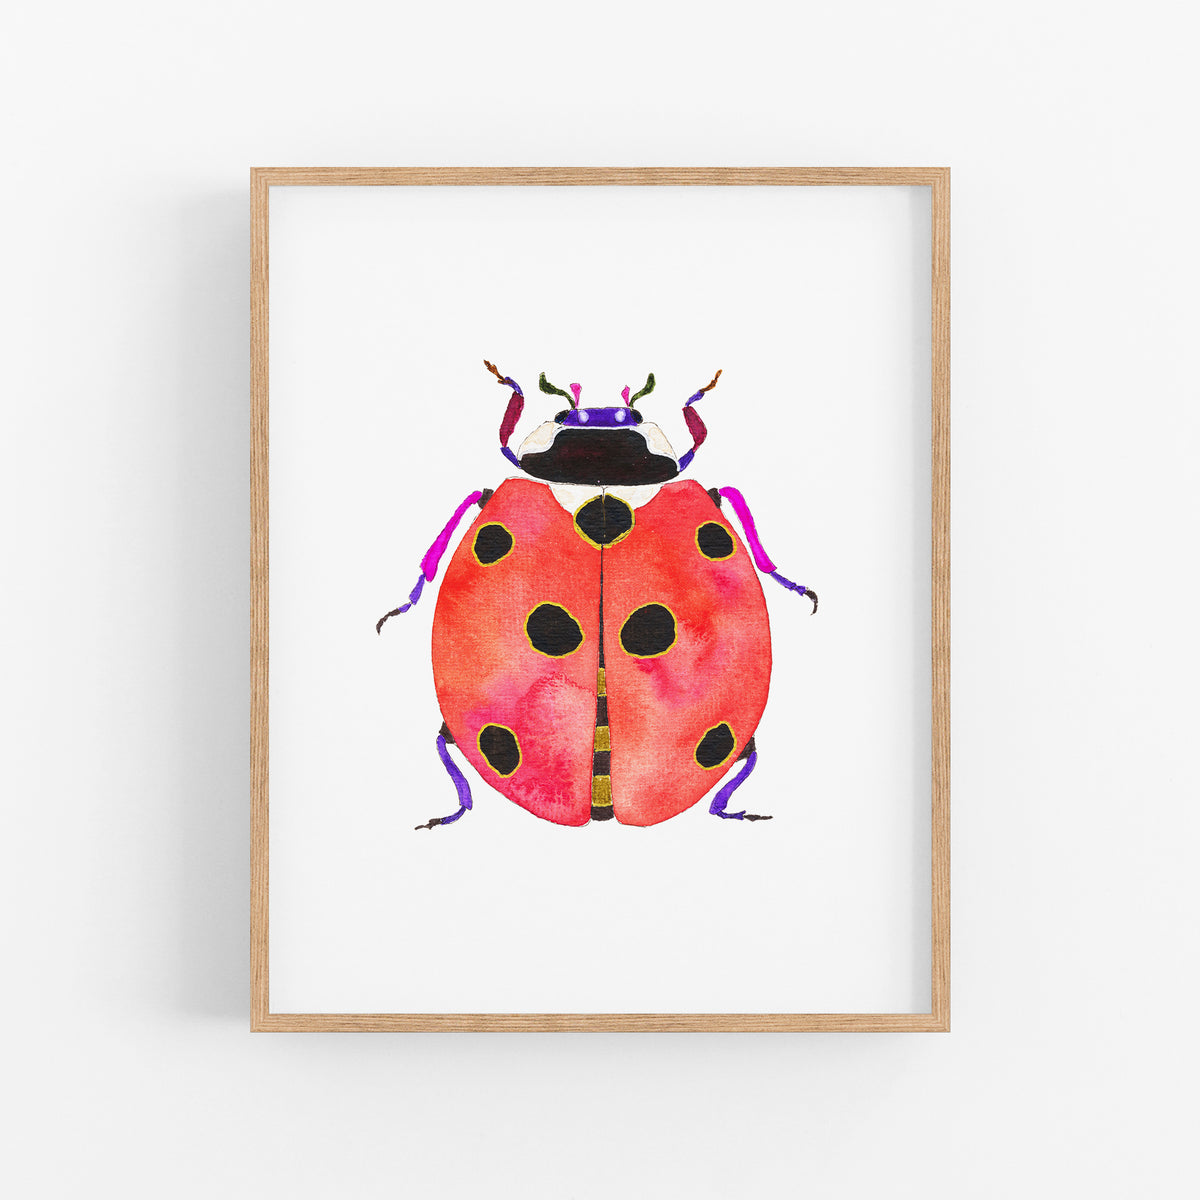 a watercolor painting of a ladybug on a white wall